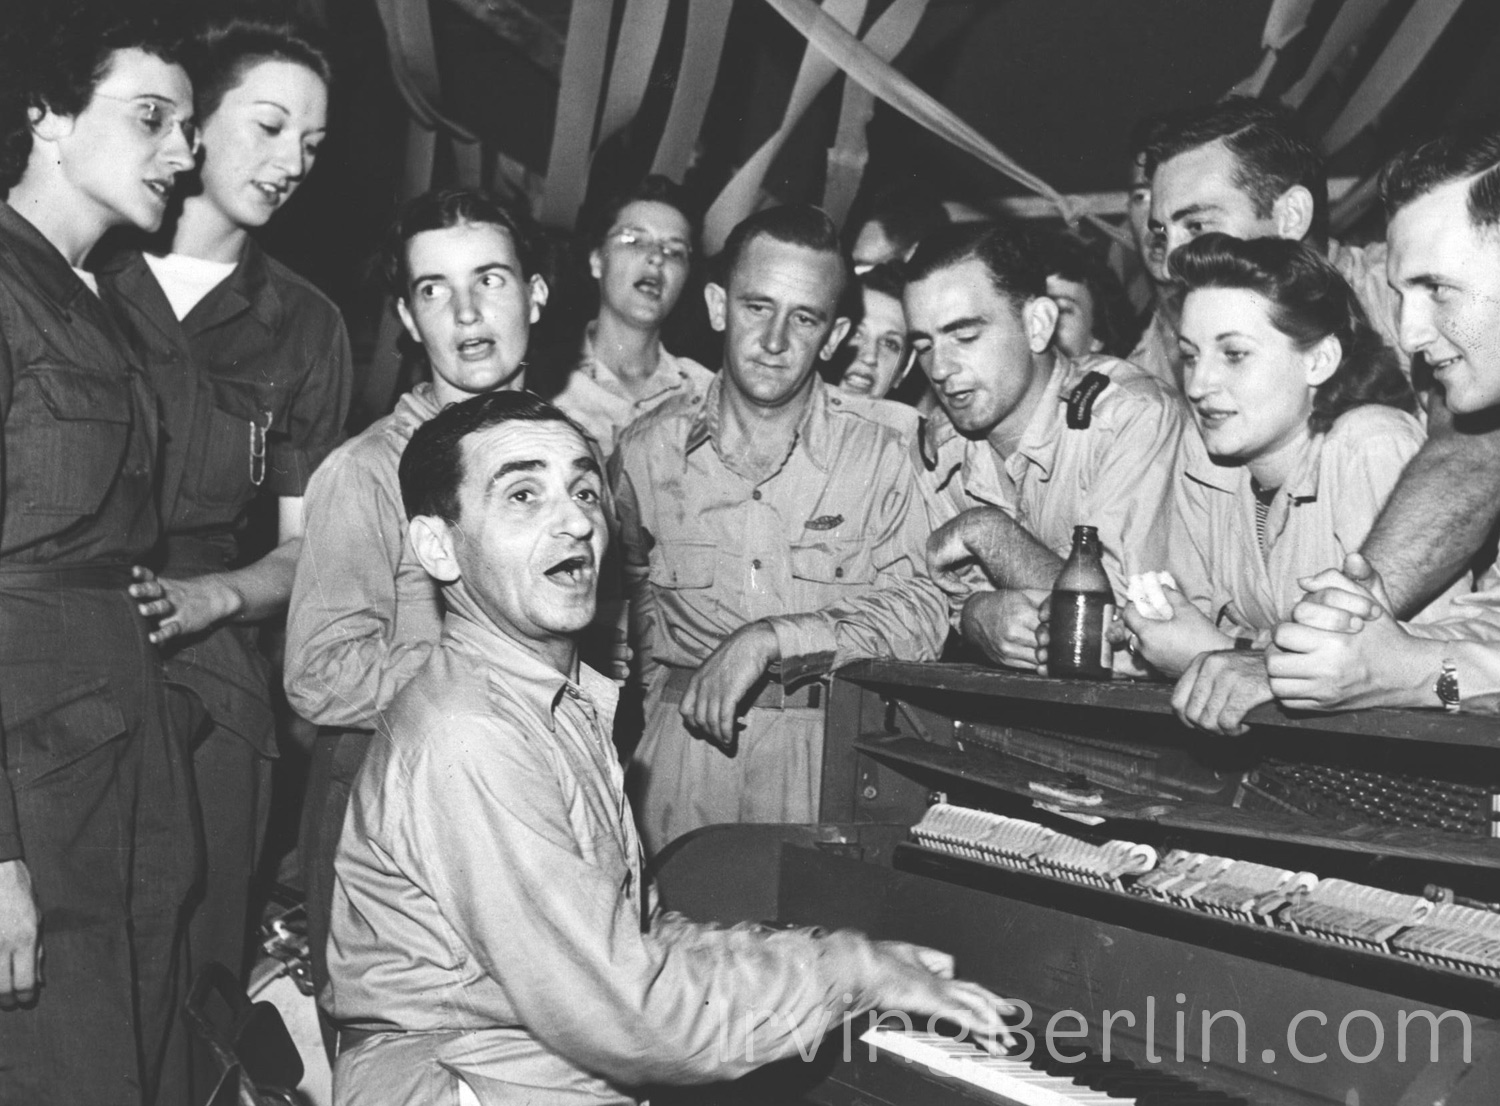  Irving Berlin playing for troops 